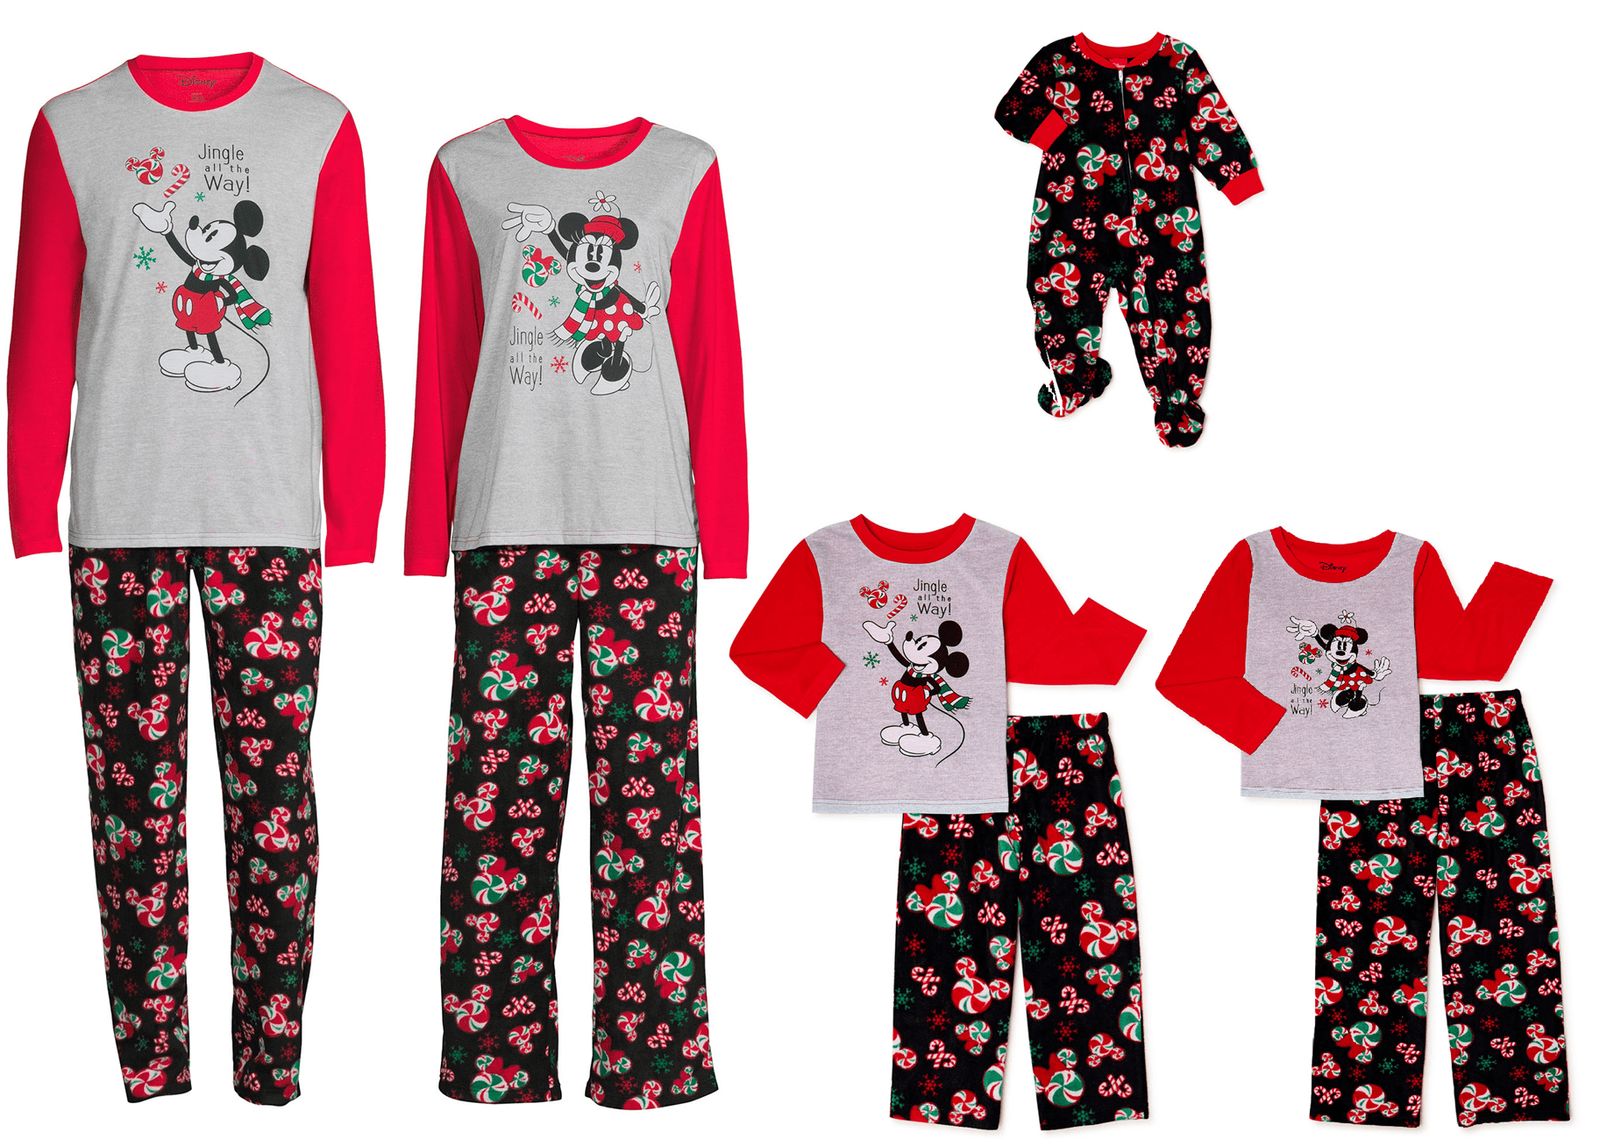 RDY 送料無料 Disney Mickey Mouse Minnie Mouse Holiday Matching Family クリスマスパジャマ 楽天海外通販 Disney Mickey Mouse Minnie Mouse Holiday Matching Family Christmas Pajamas